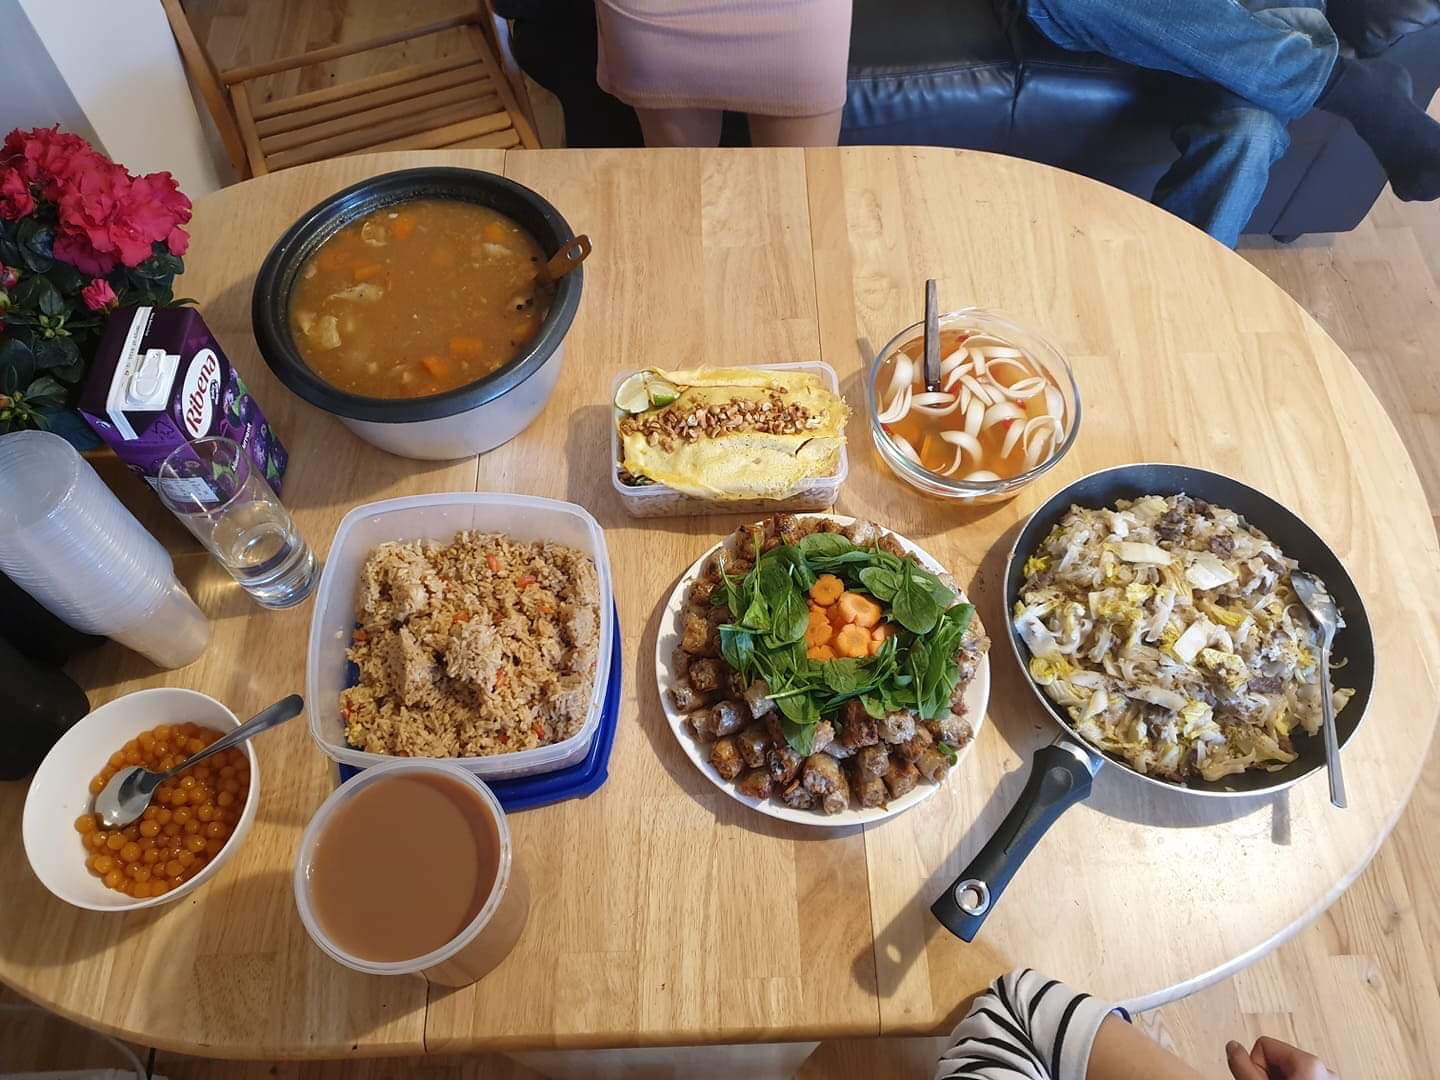 Kitchen table showing a variety of homecooked dishes ready to be shared